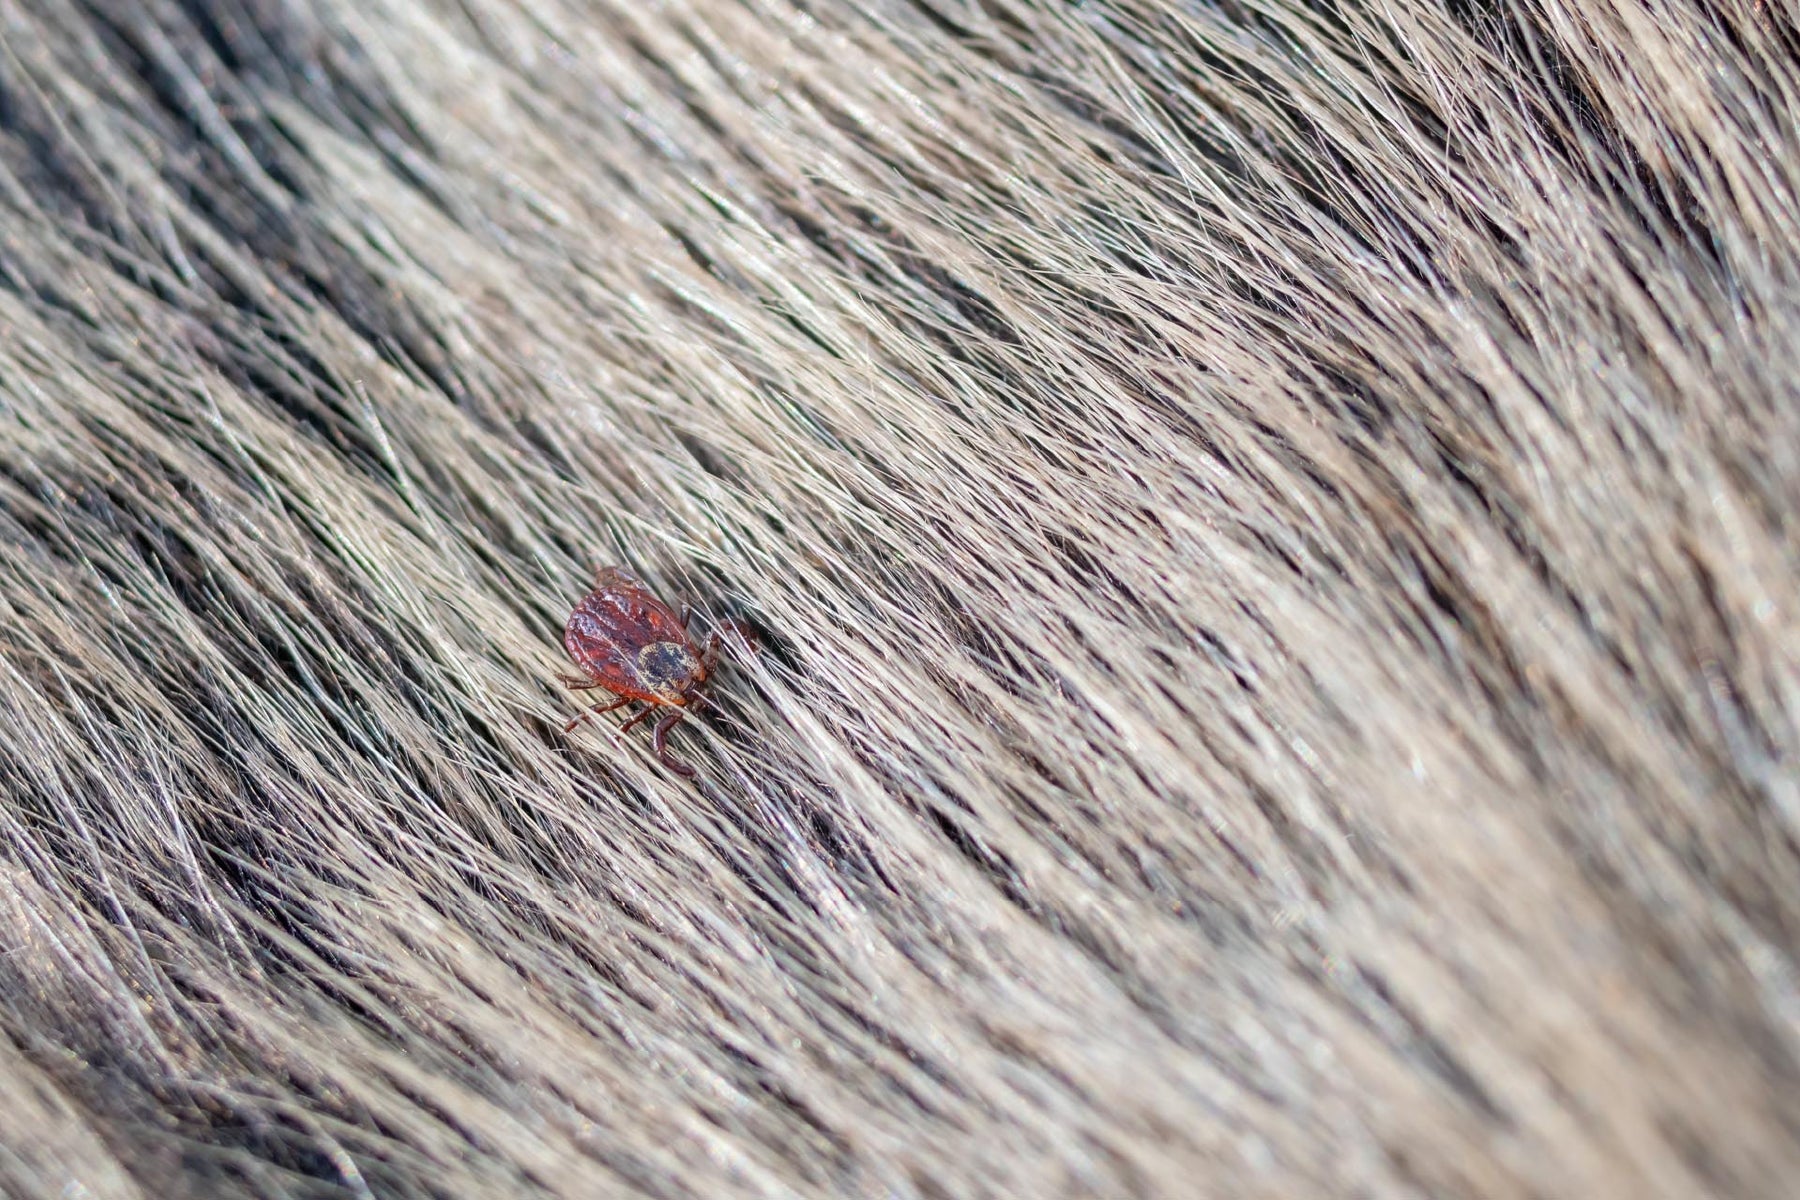 How To Find and Remove A Tick